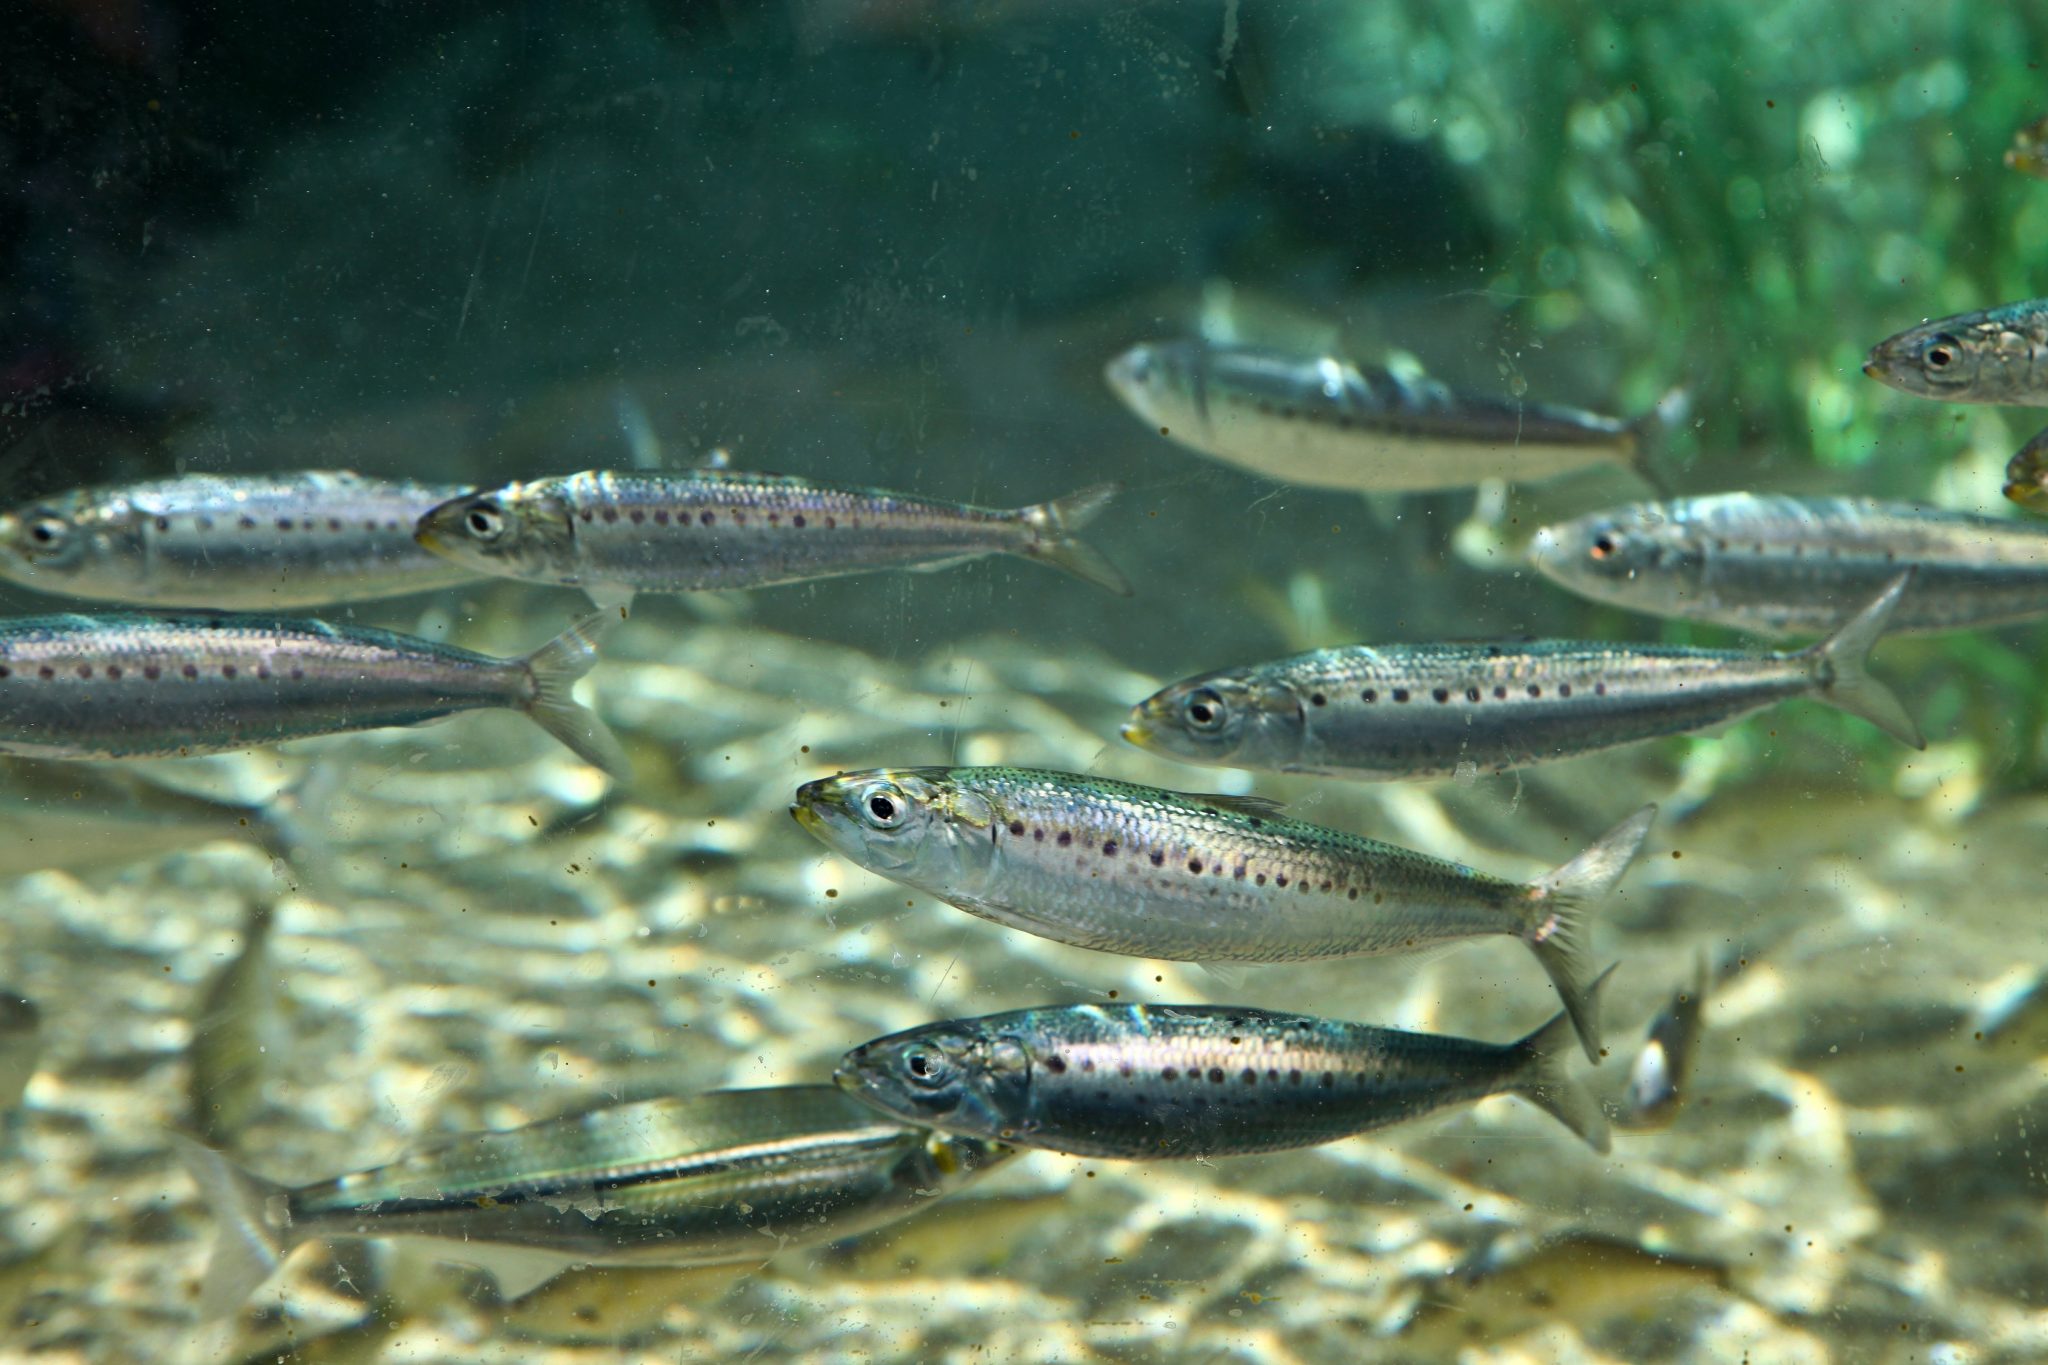 Suppliers for Minnows and Shiners - Alabama Cooperative Extension